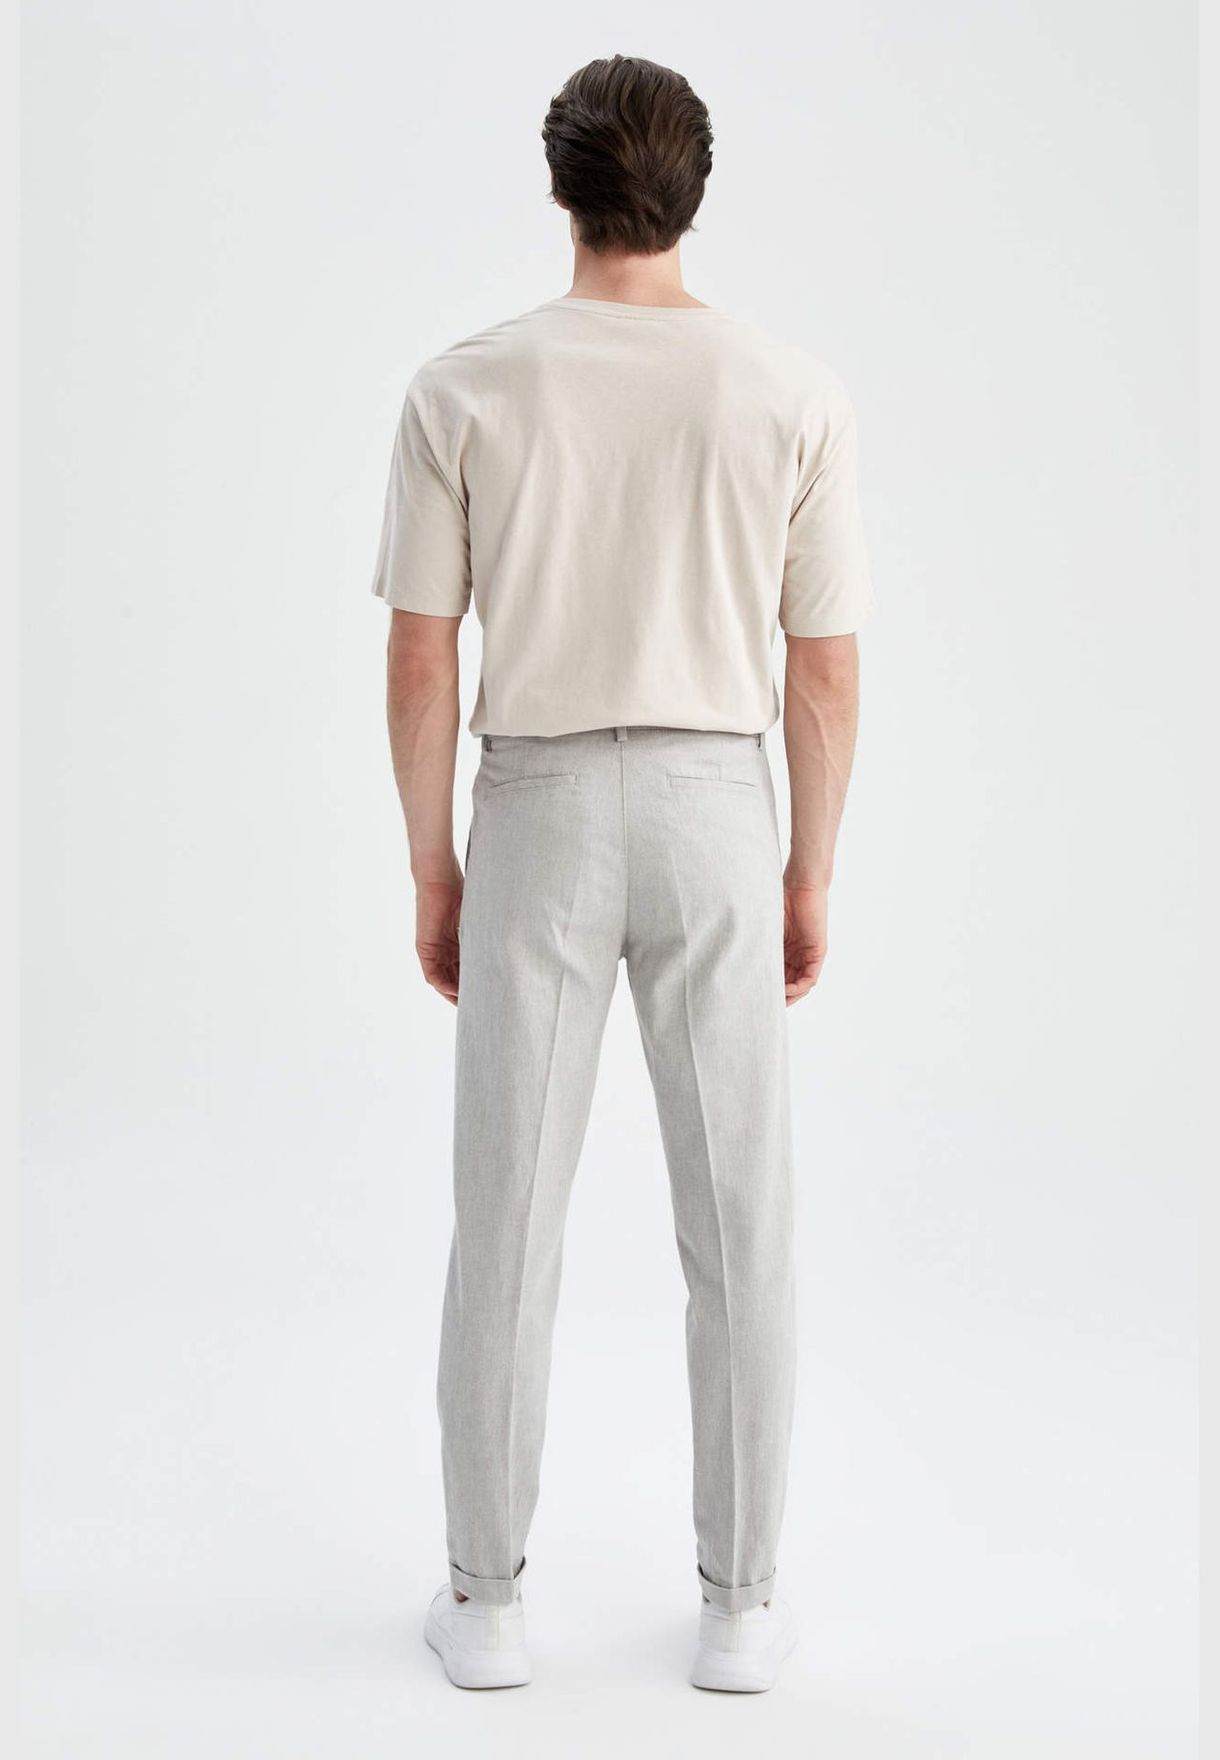 Basic Pleated Trousers